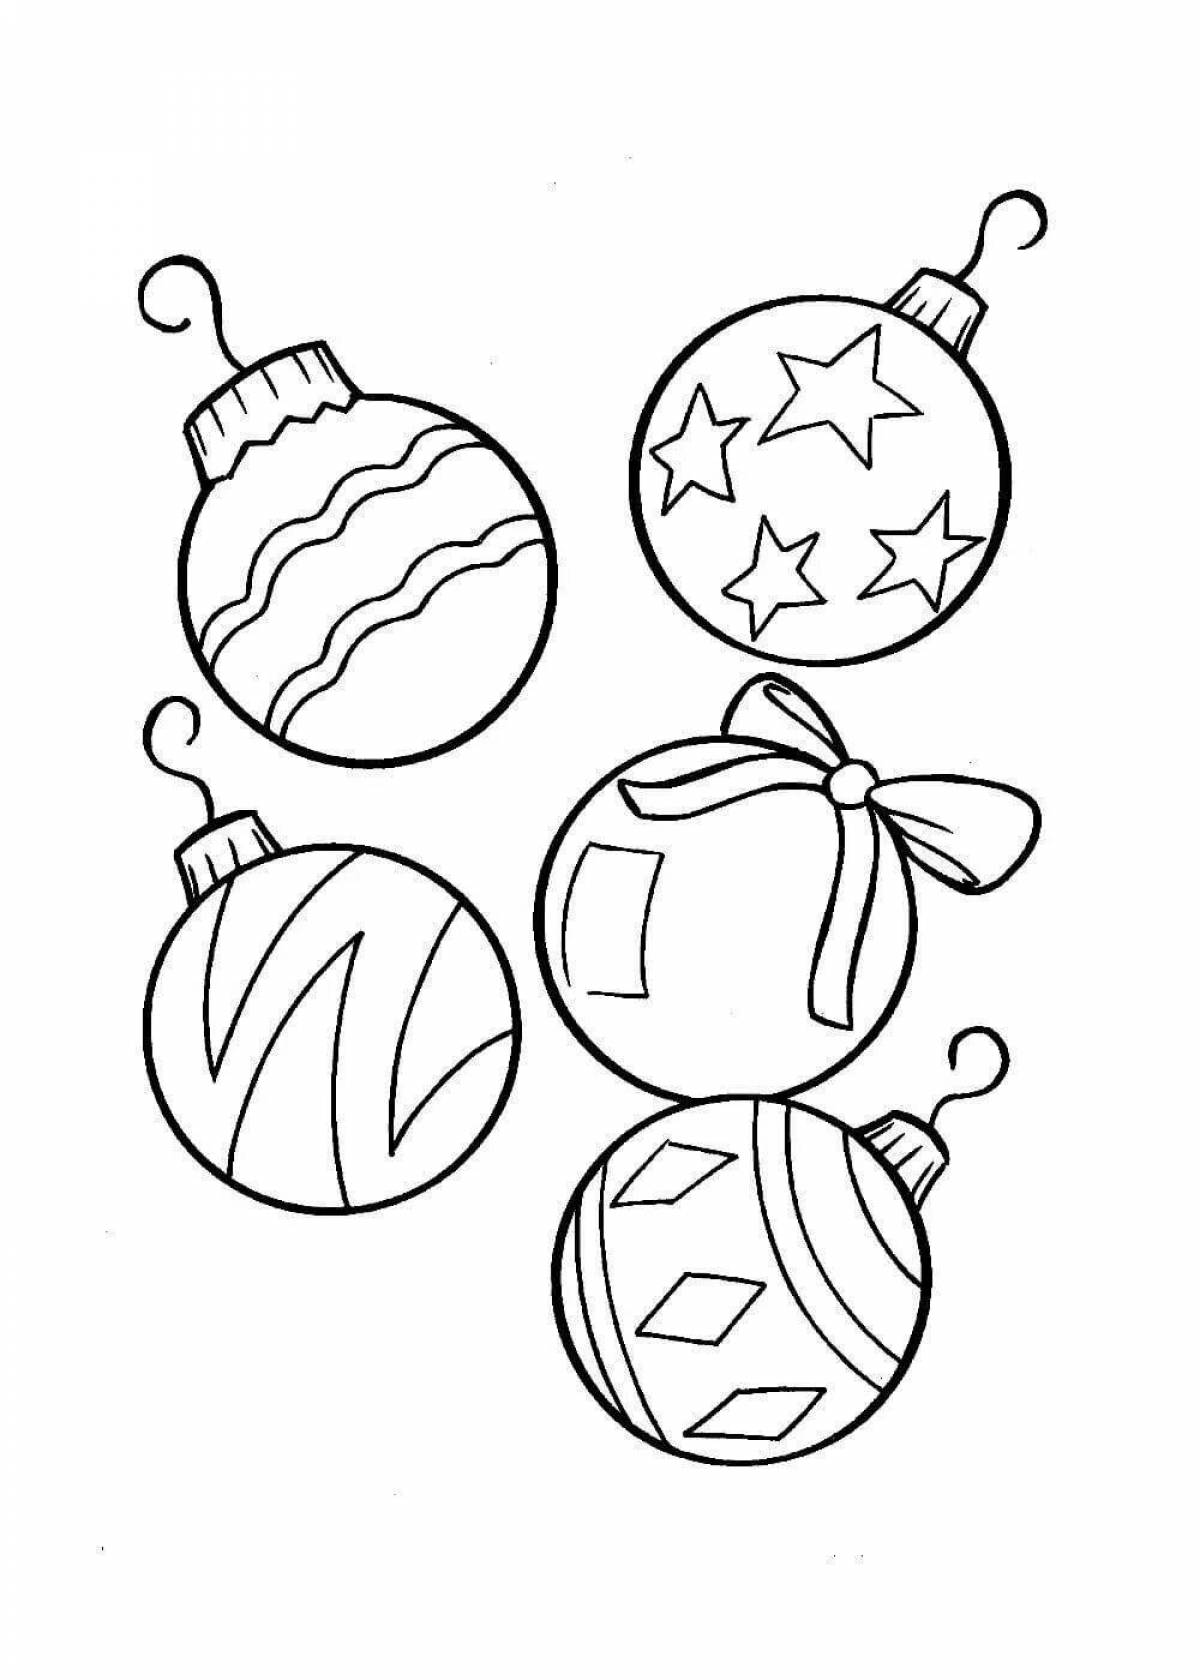 Glowing Christmas ball coloring book for kids